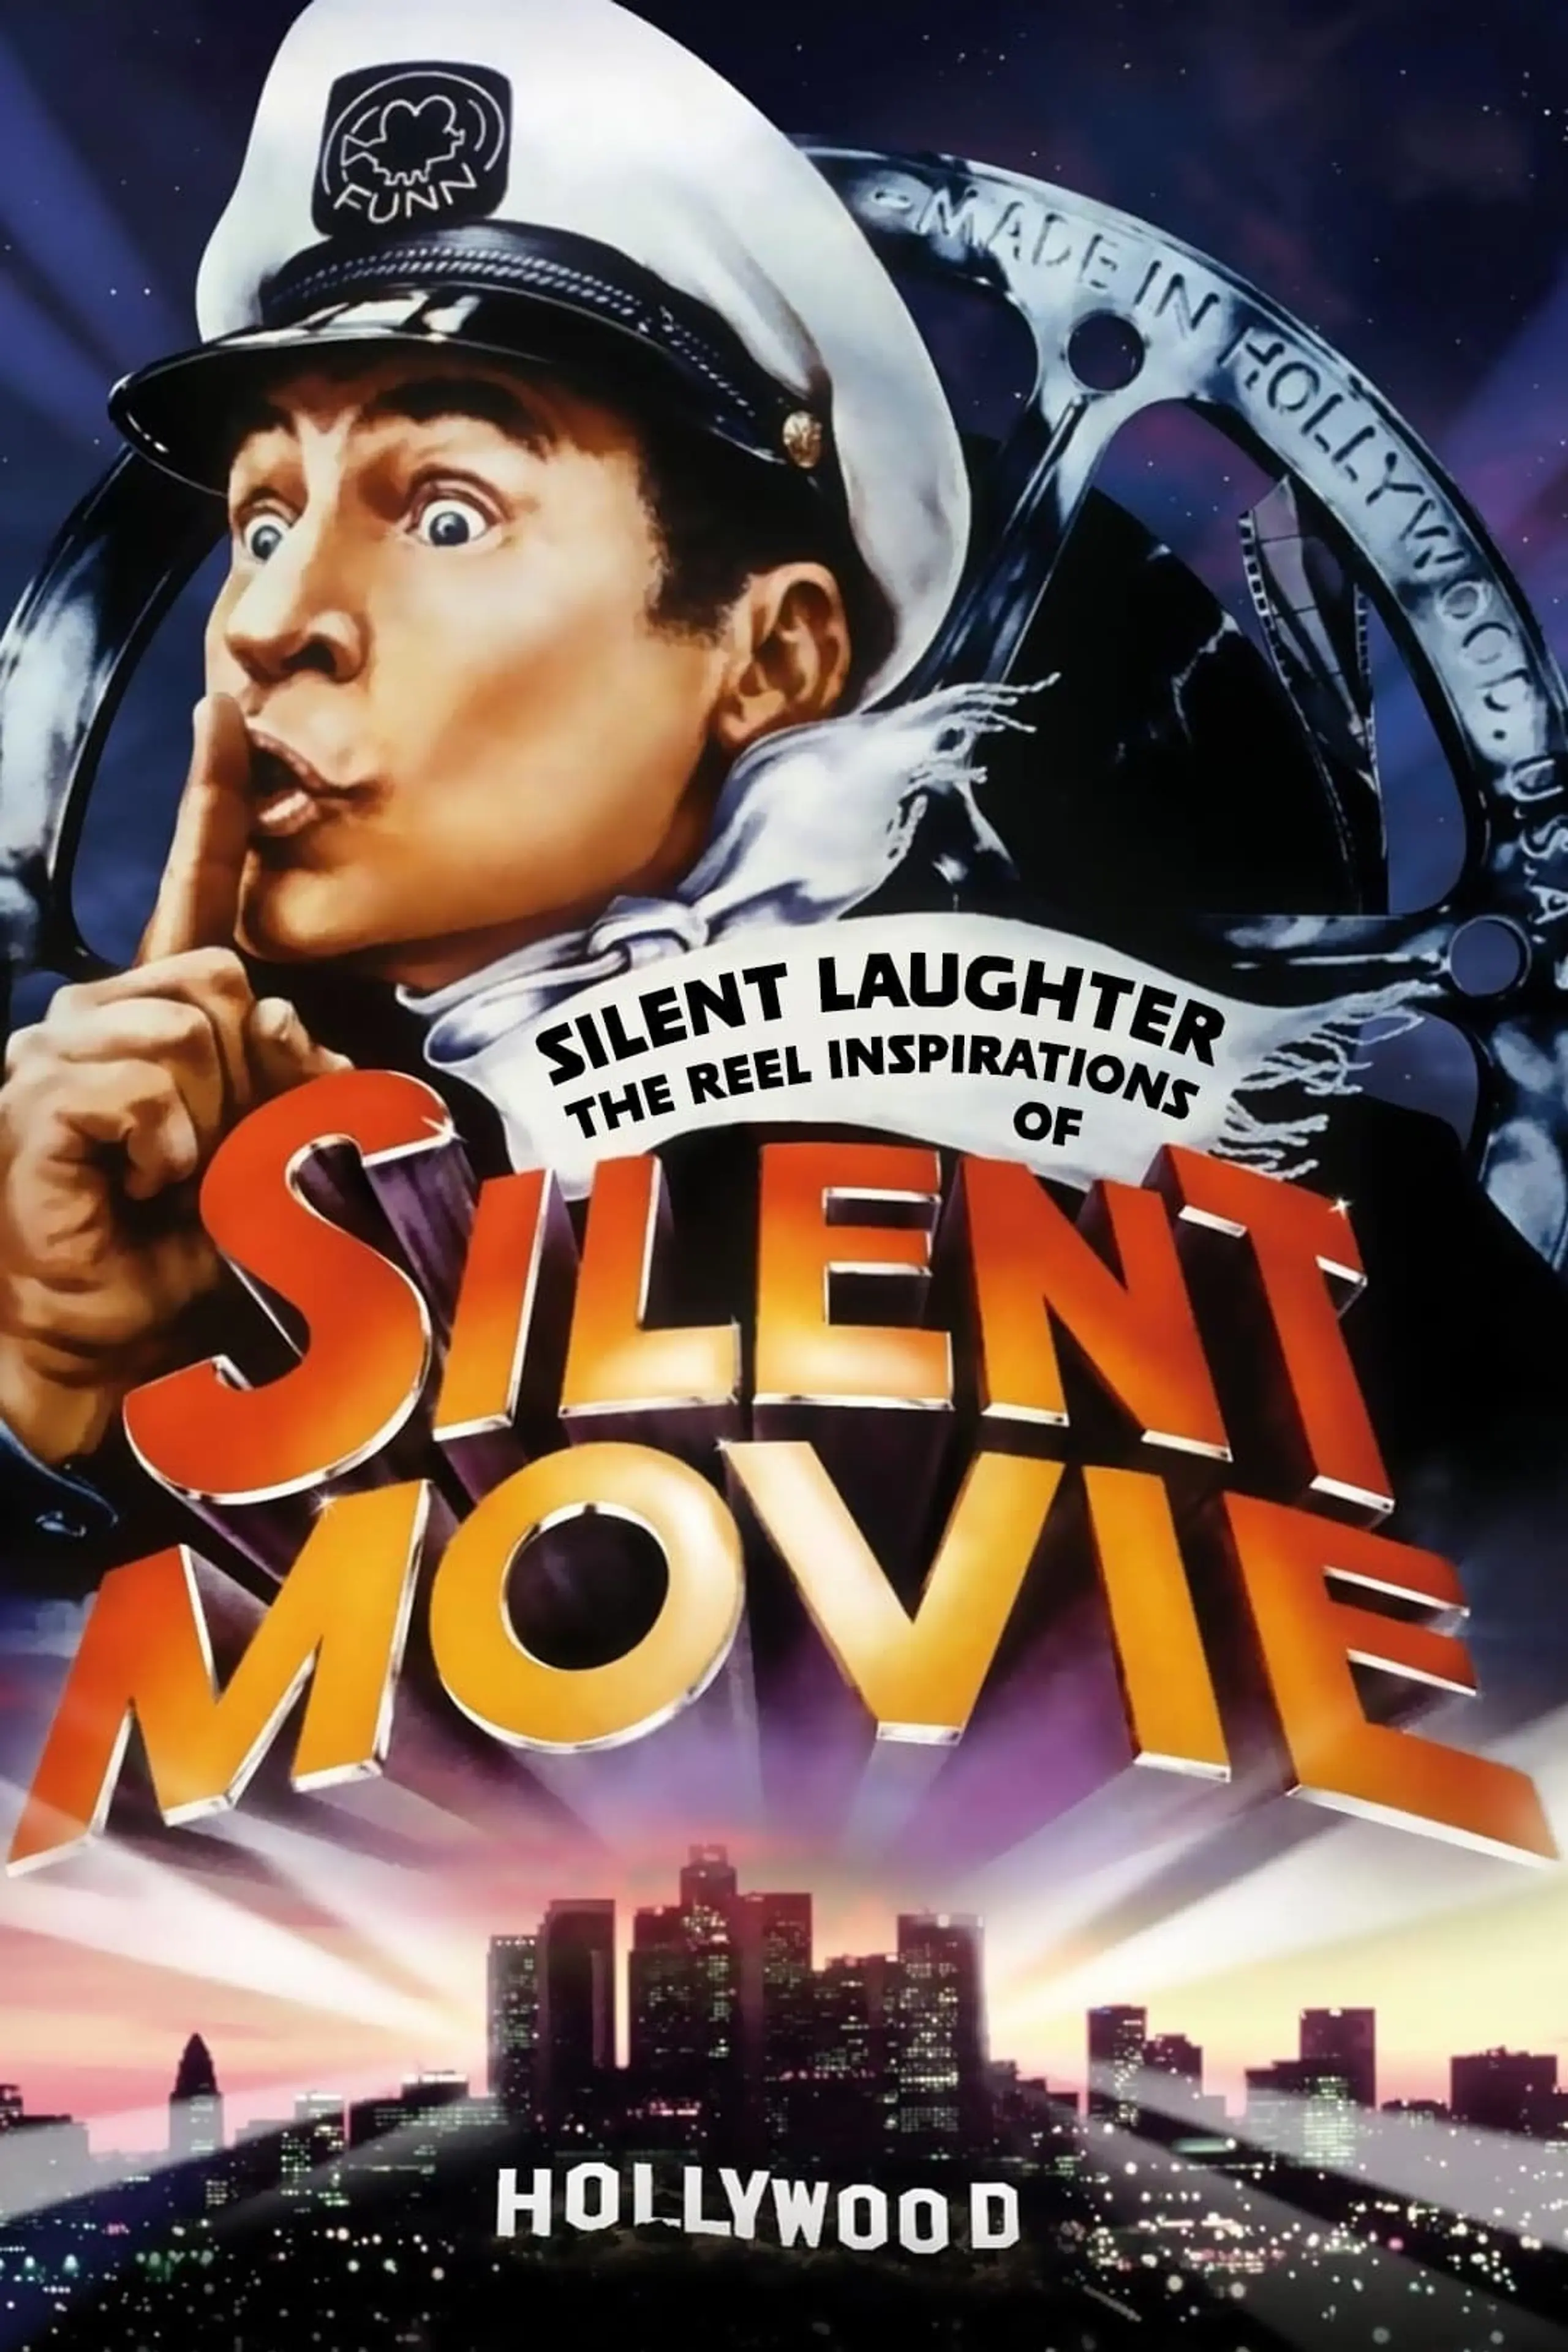 Silent Laughter: The Reel Inspirations of Silent Movie